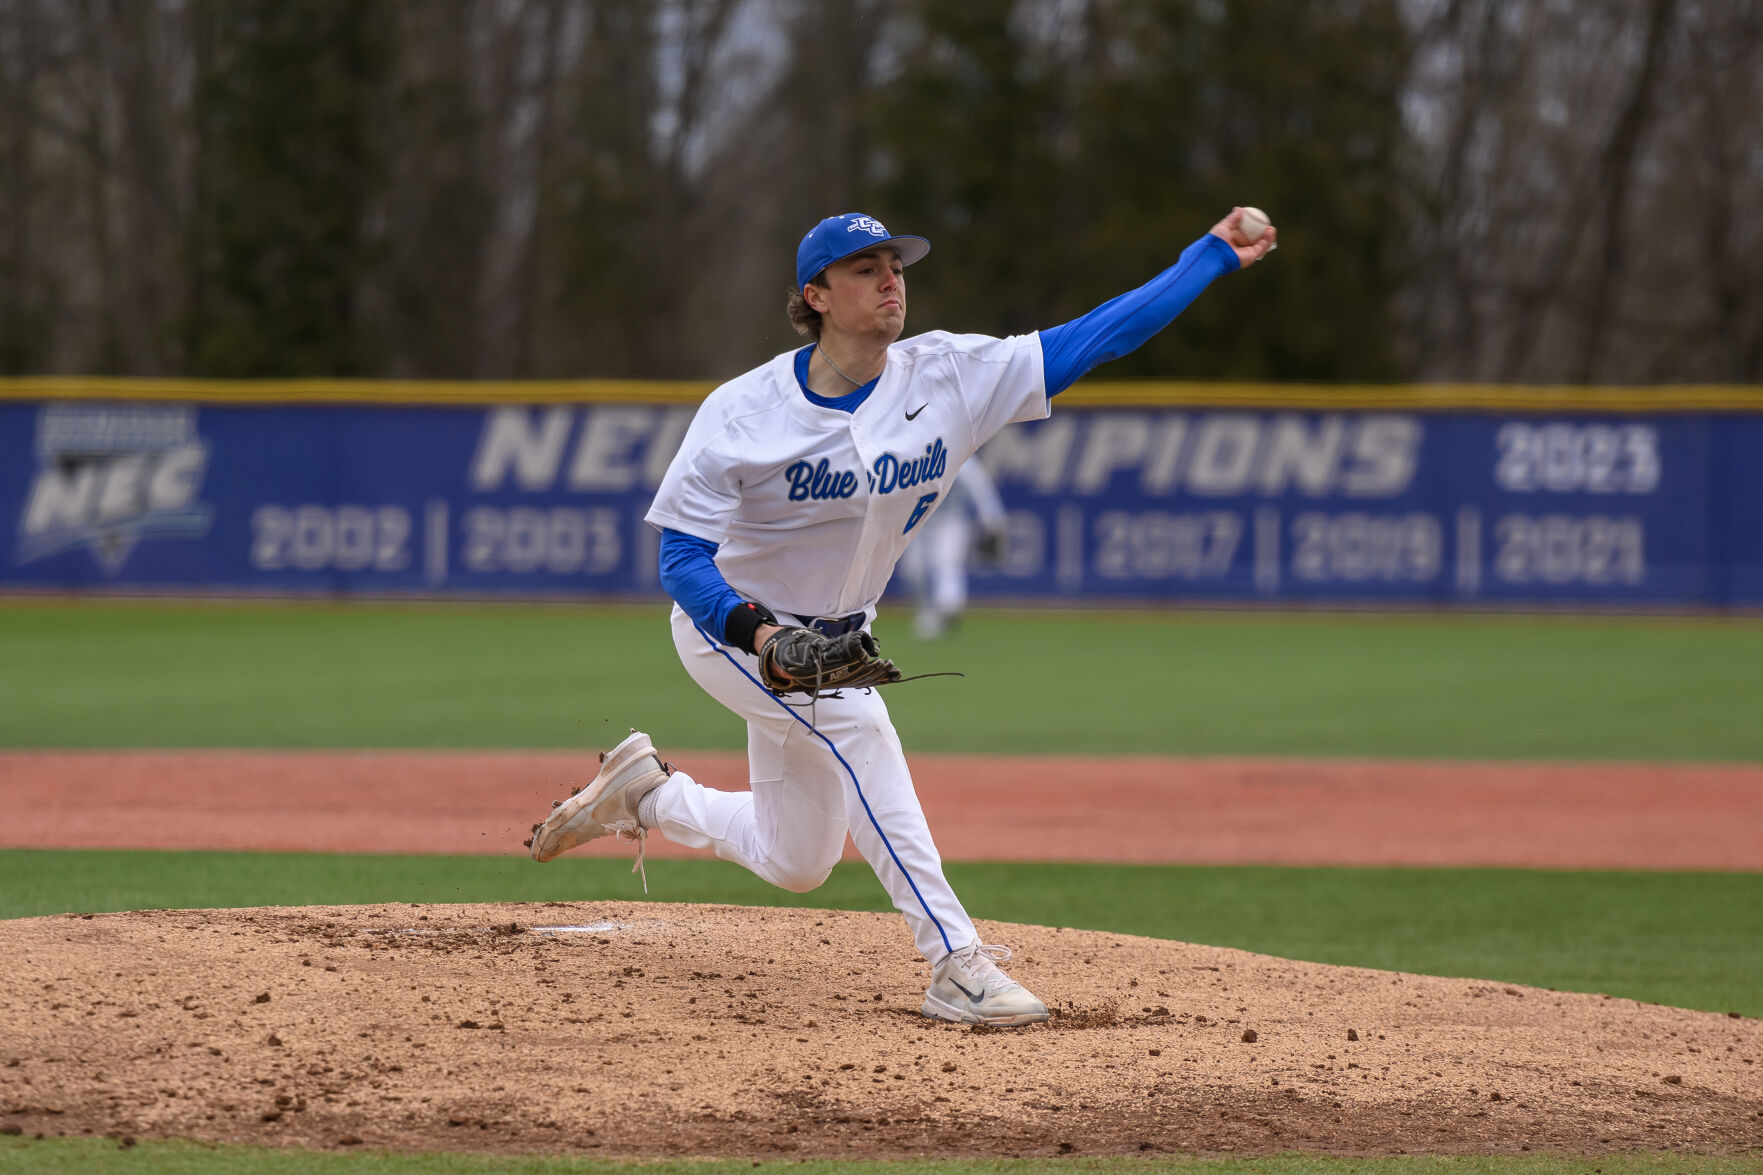 CCSU pitcher, Southington native, named NEC Pitcher of Week, Rios named Prime Performer